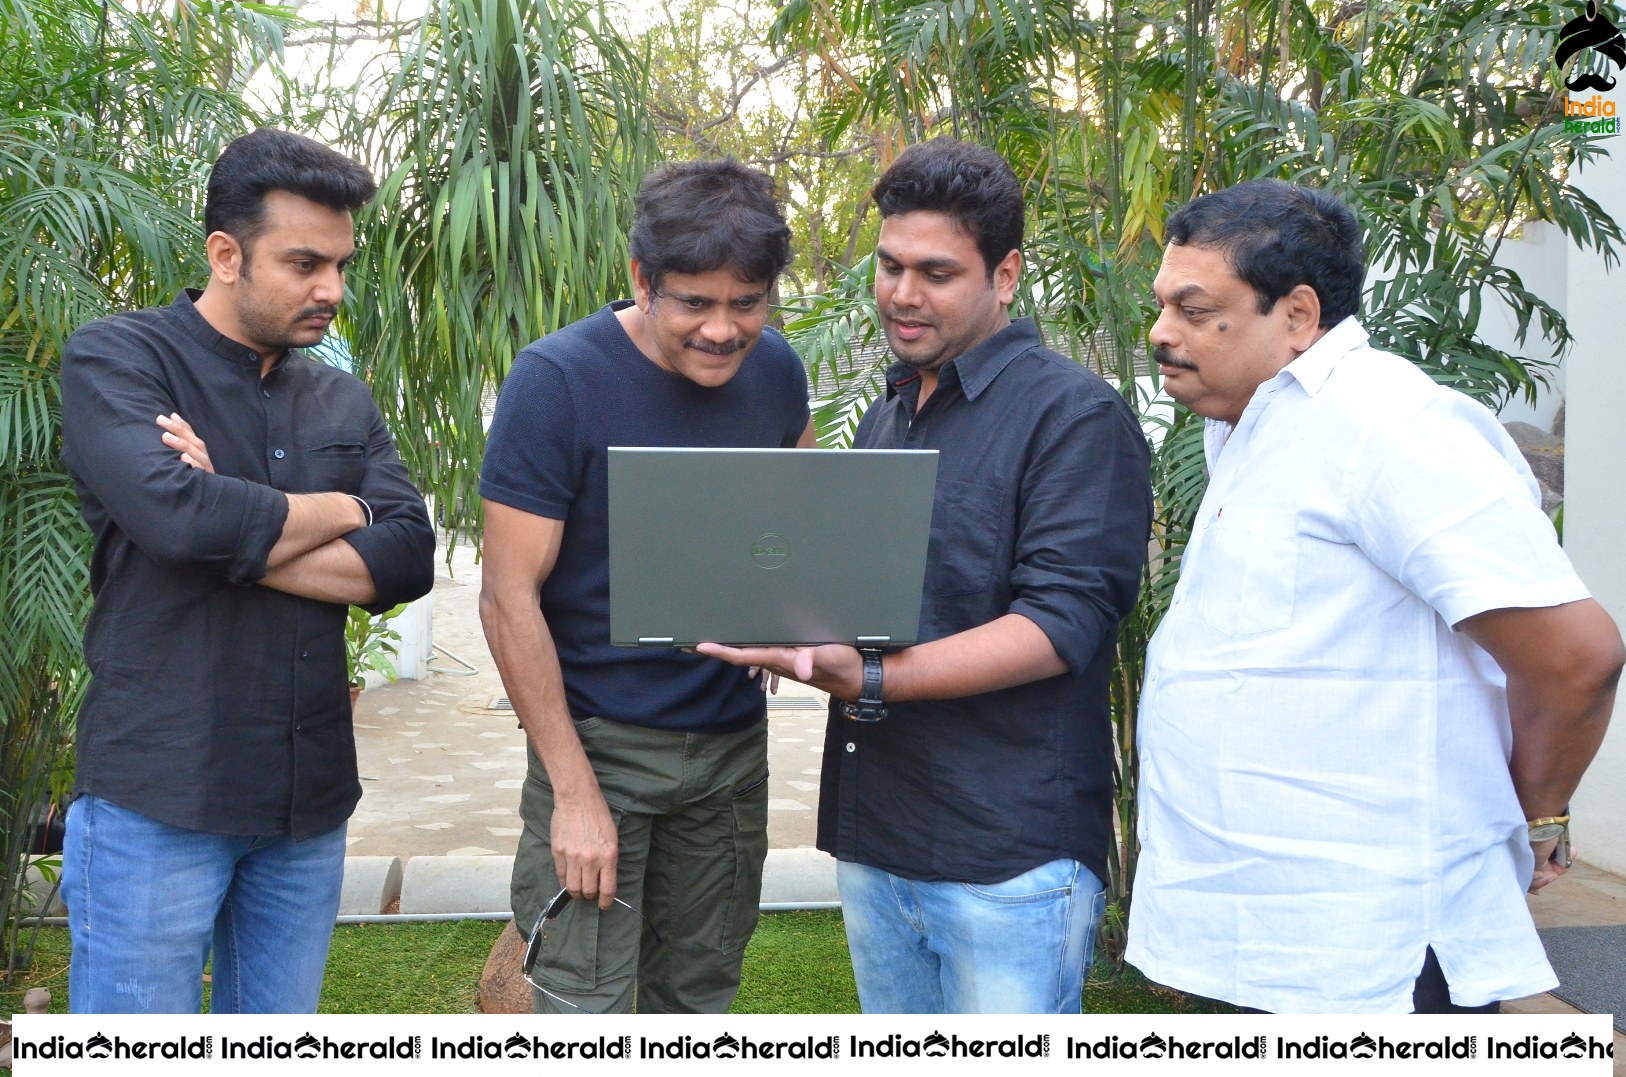 Photos of 22 Movie Teaser launched by Nagarjuna